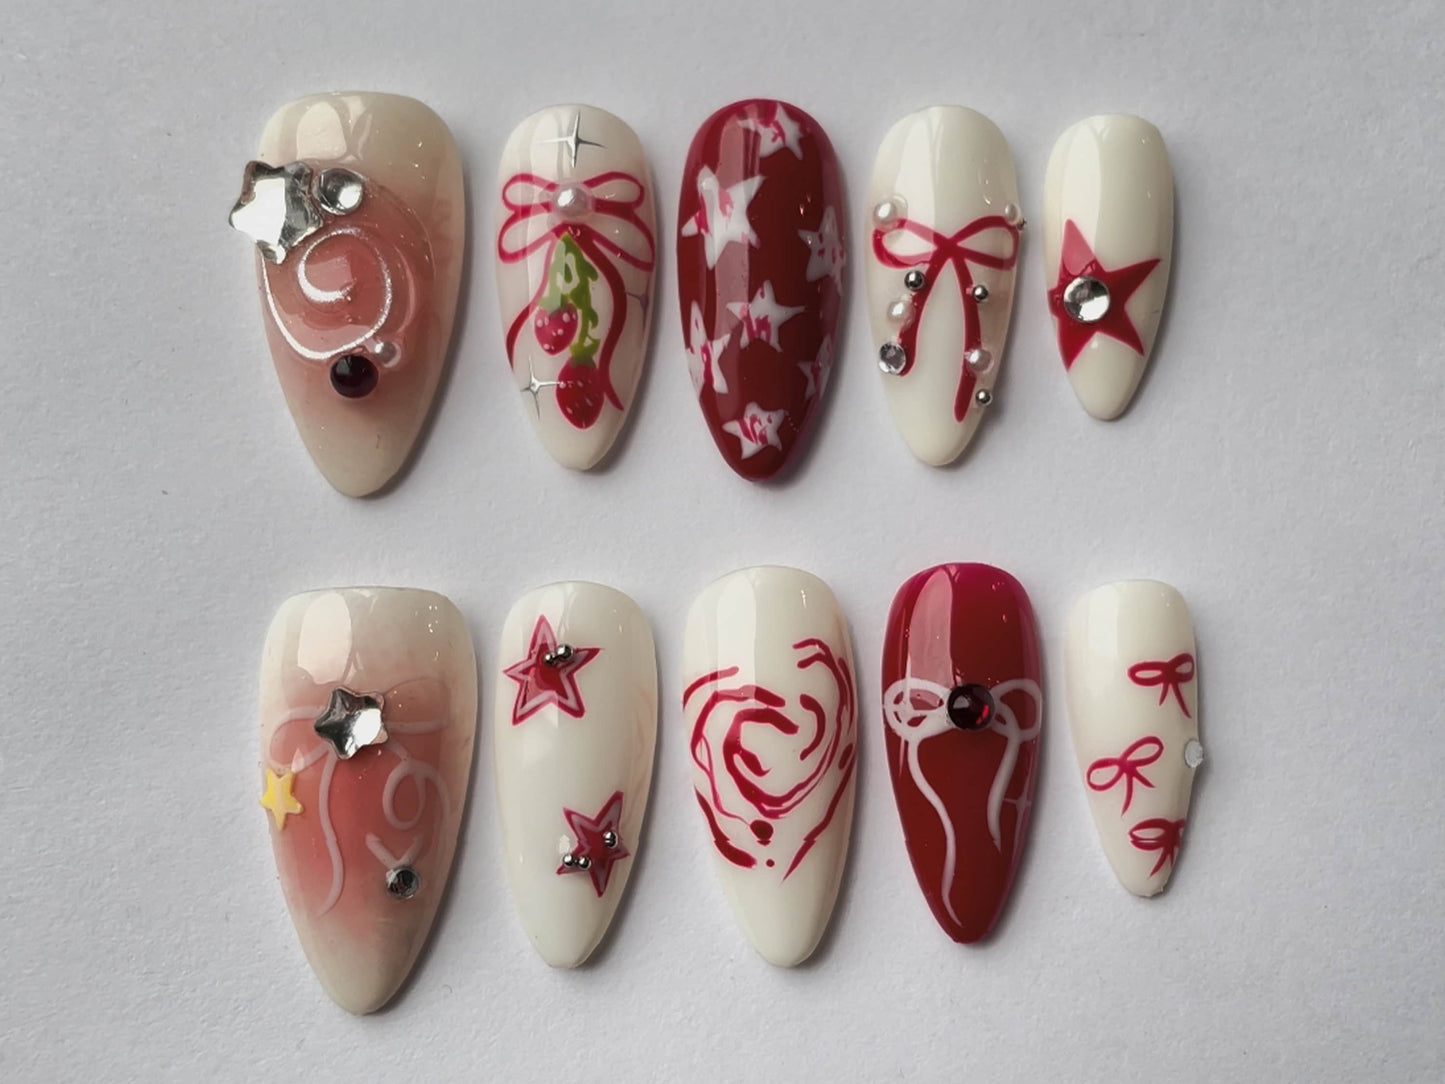 Y2k-Inspired Press On Nails | Y2k Nail Set with Elegant Motifs | Red and White with Unique Chrome Designs | Gift For Her | J149